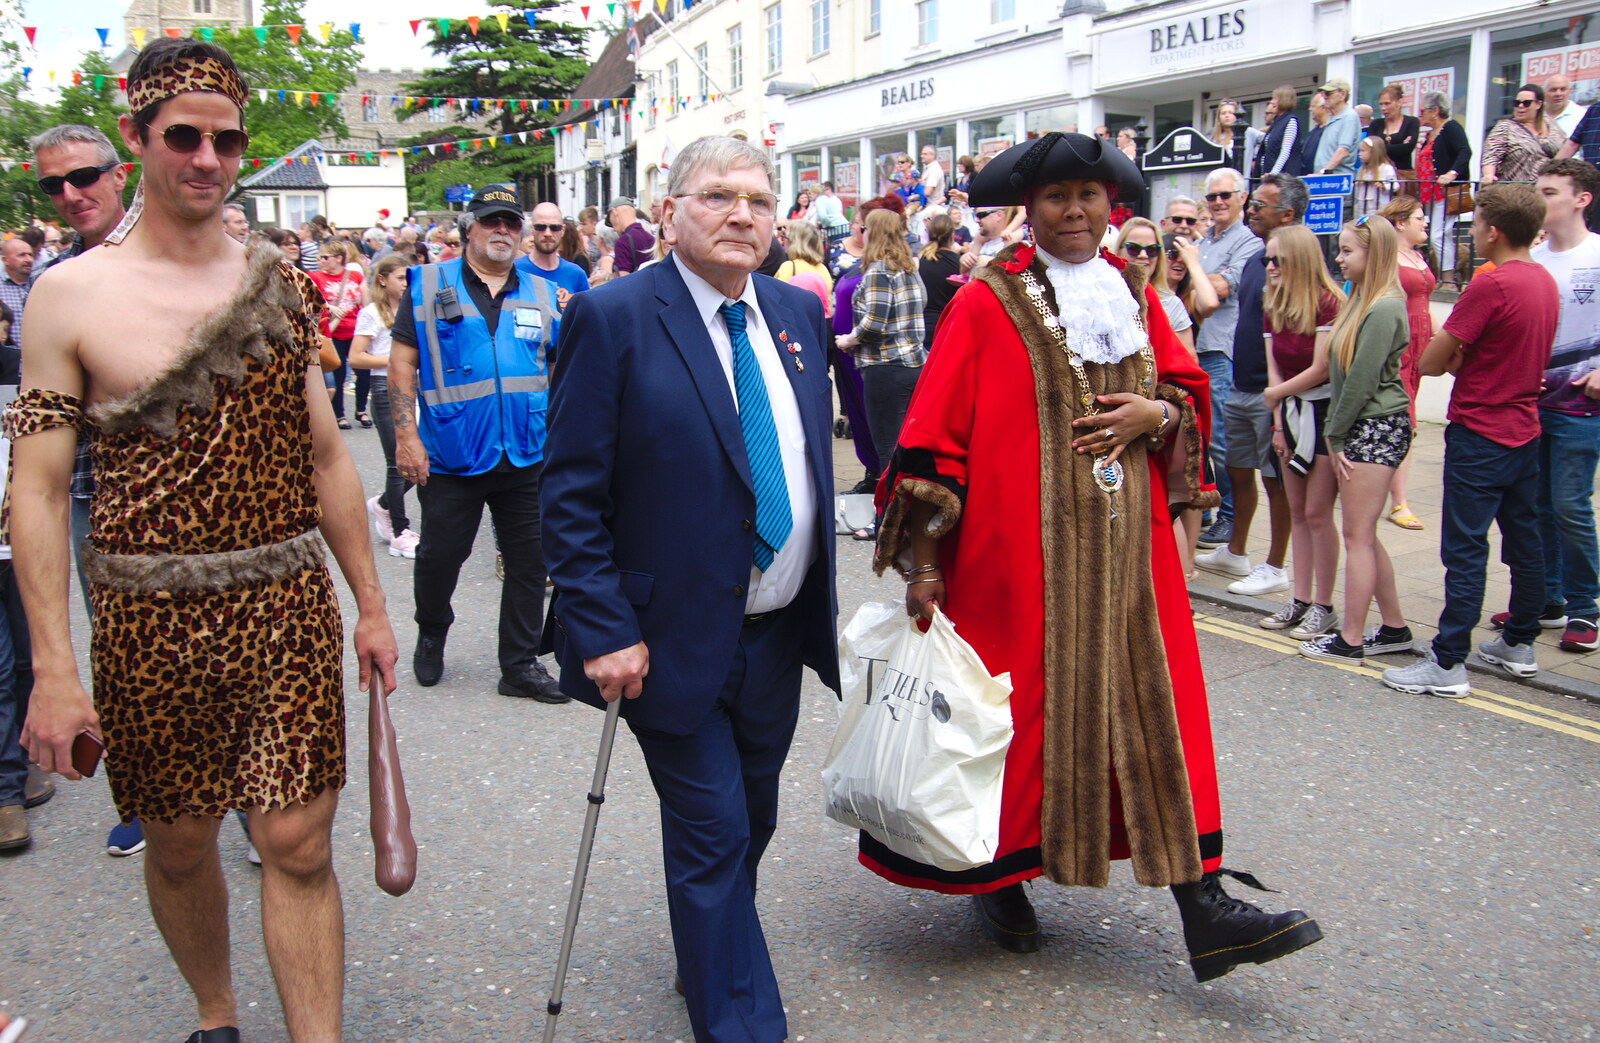 The mayor of Diss, Councillor Sonia Browne from The Diss Carnival 2019, Diss, Norfolk - 9th June 2019